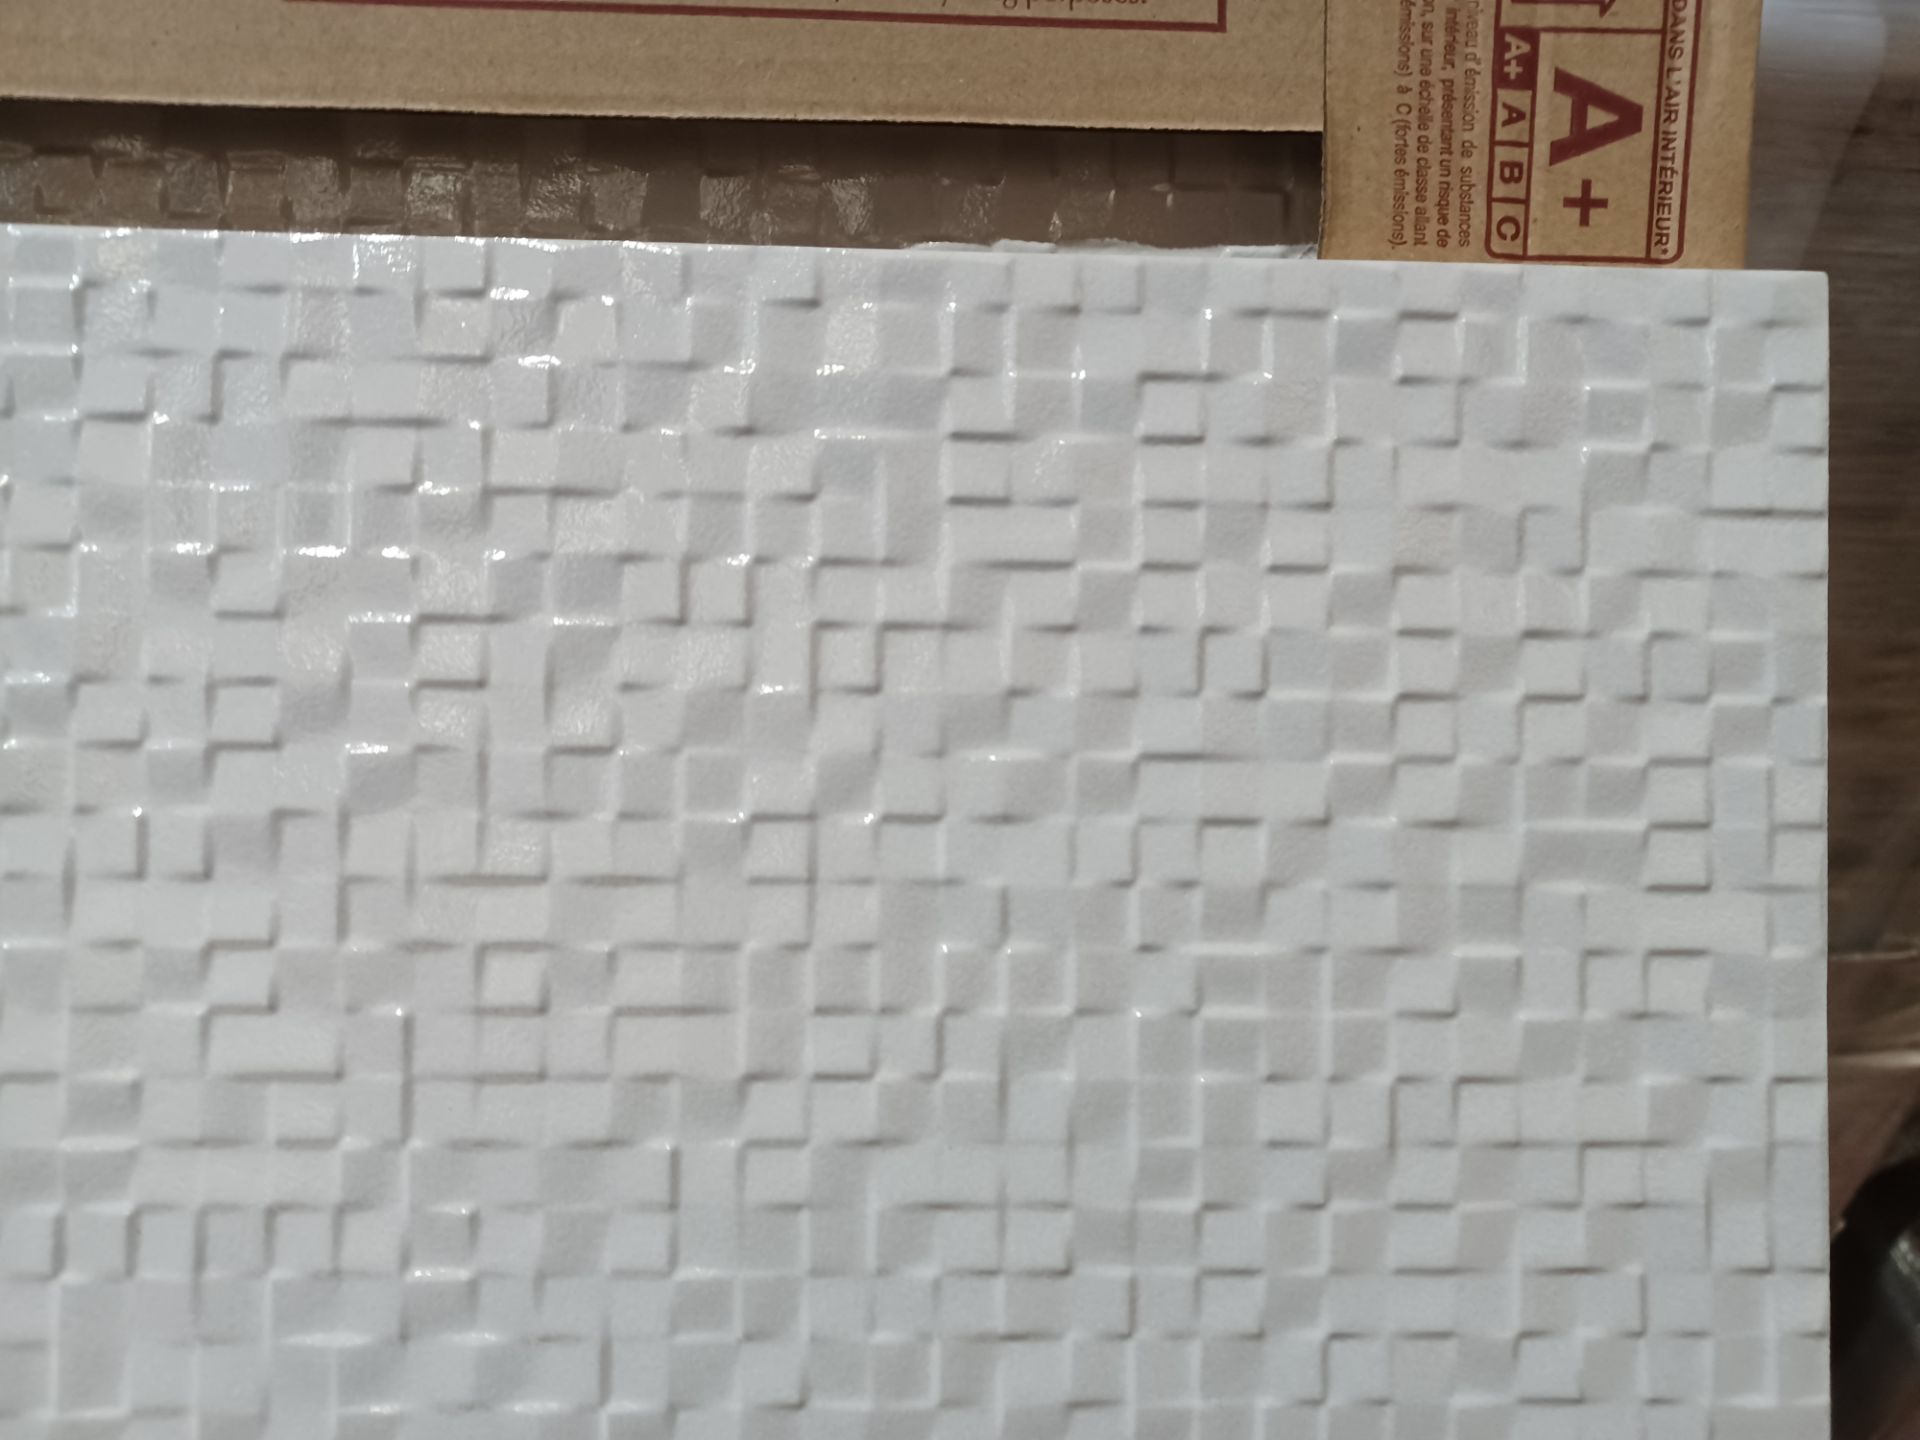 10 X PACKS OF PORCELANOSA CUBICO BLANCO 250x443mm Wall Tiles. EACH PACK CONTAINS 1M2, GIVING THIS - Image 2 of 2